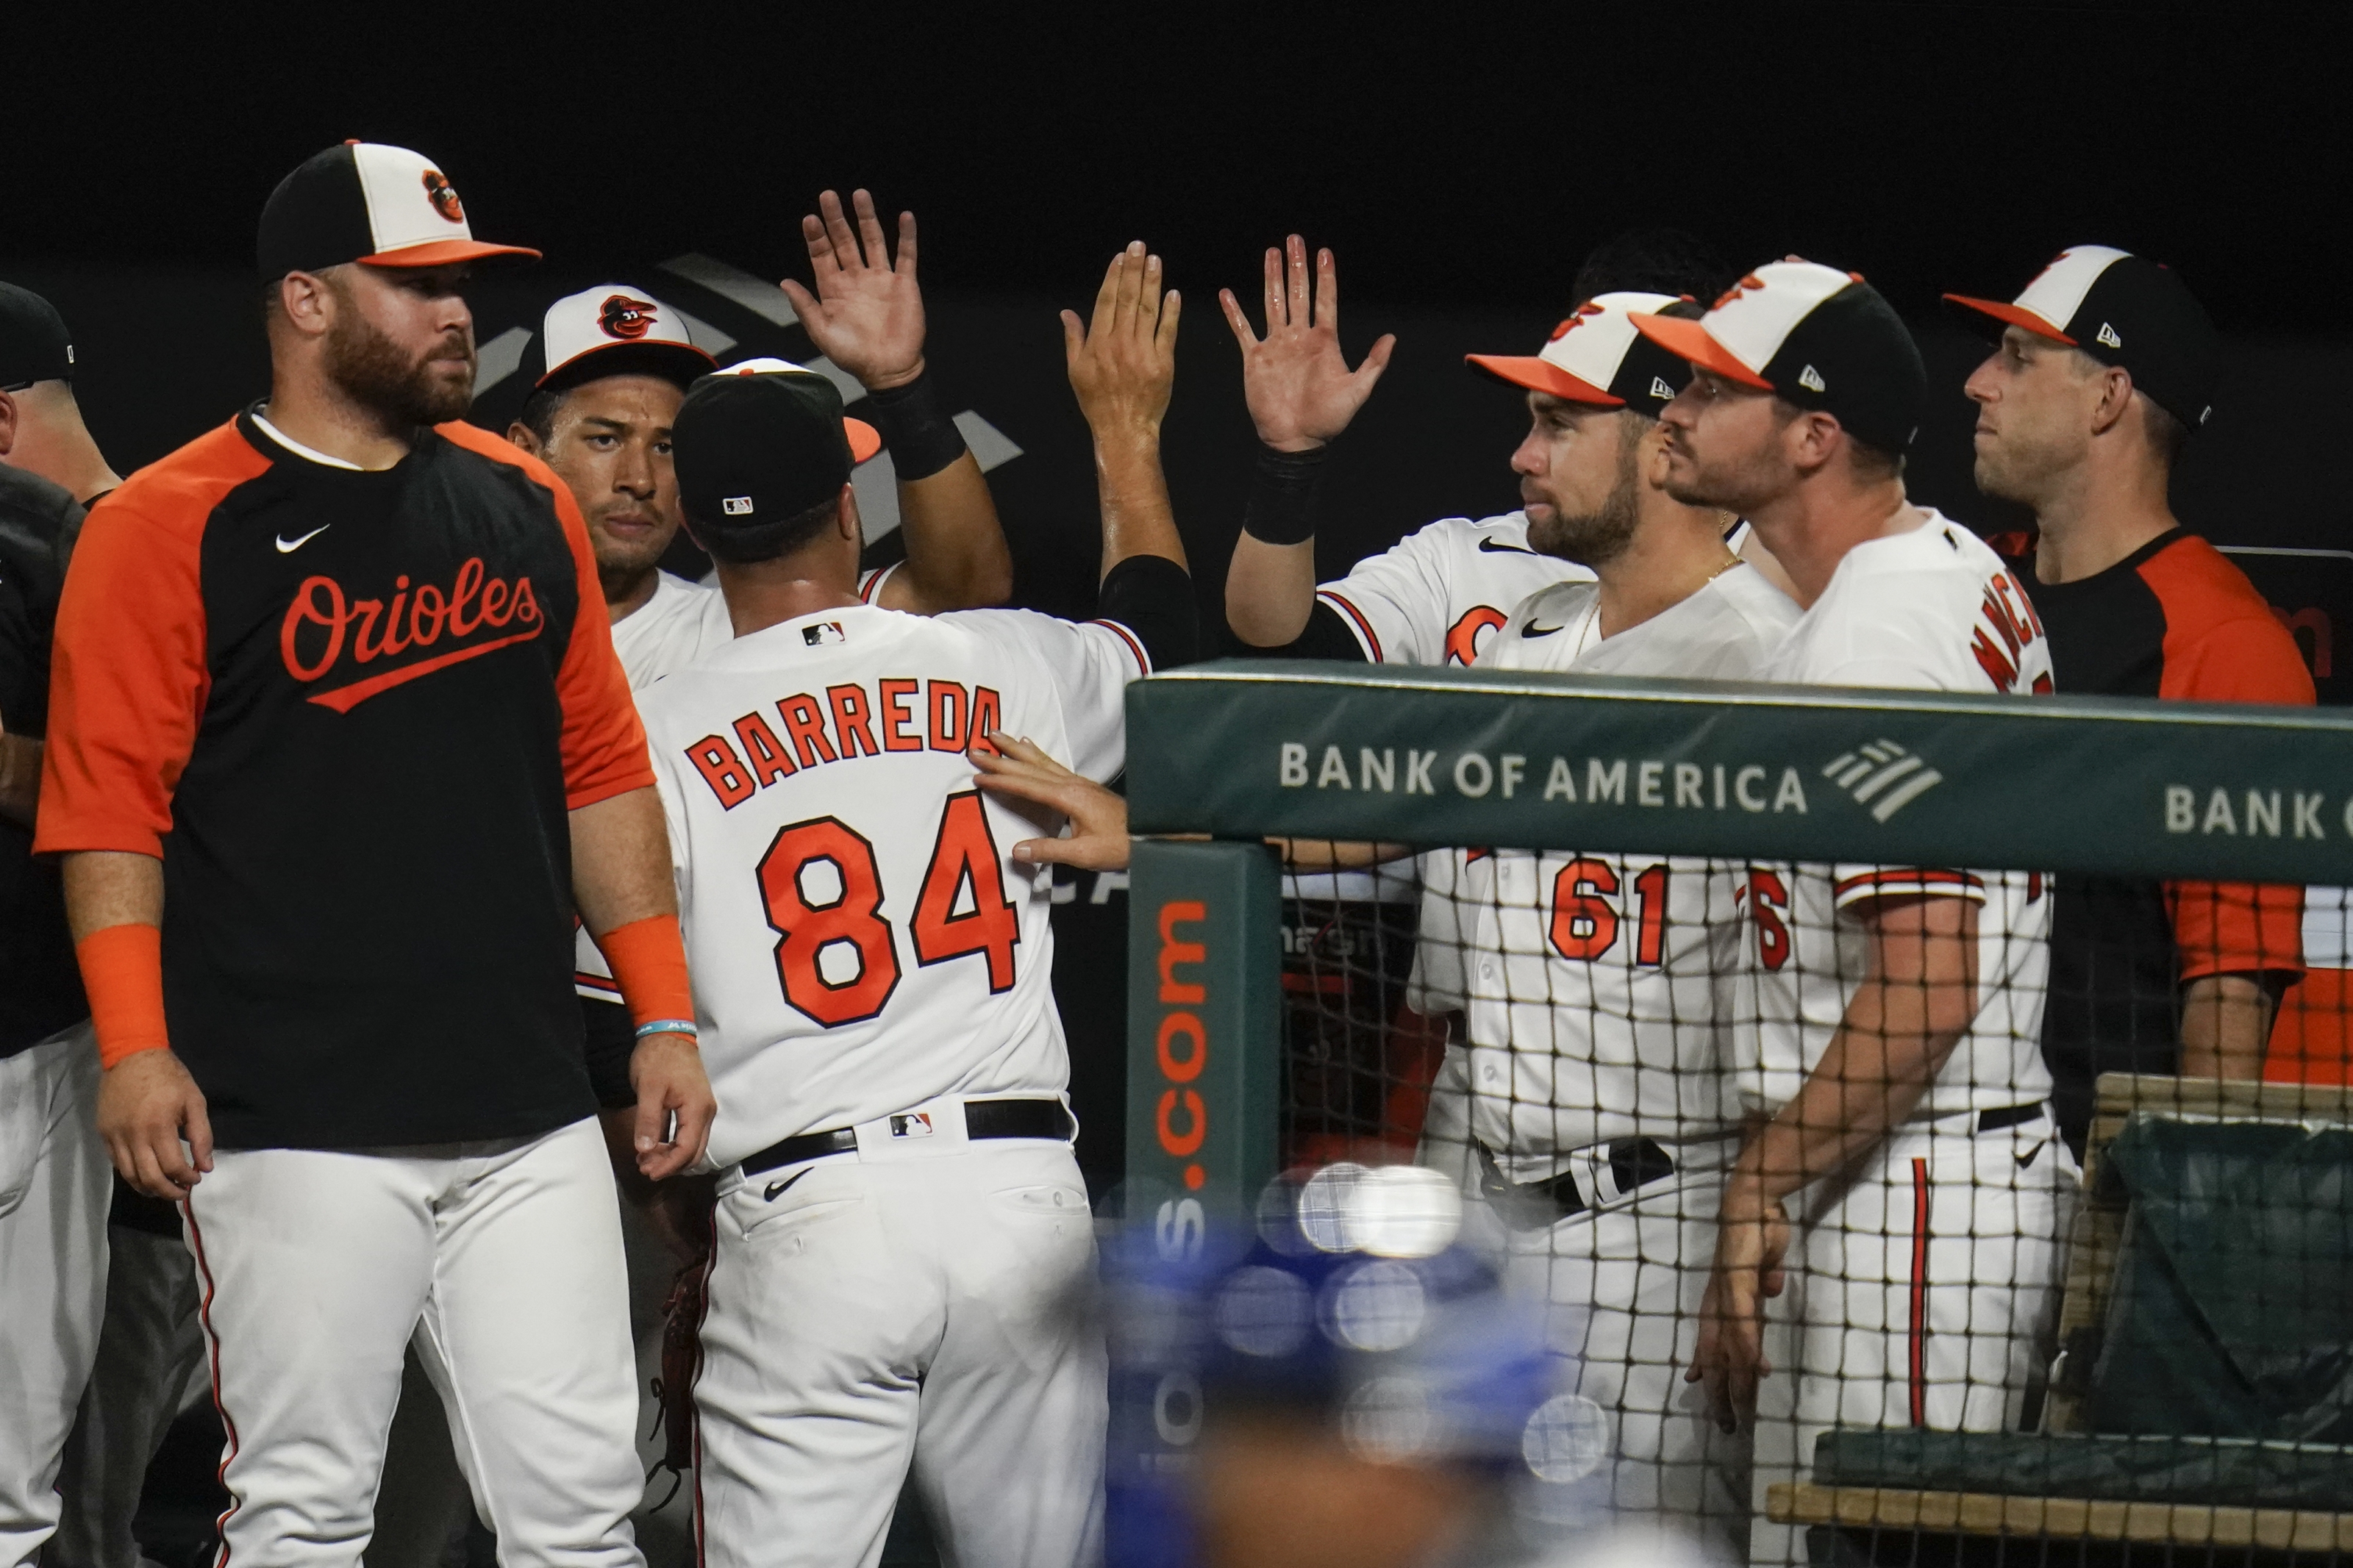 Orioles score 9 runs in 8th inning, rally past Royals 9-8 - WTOP News